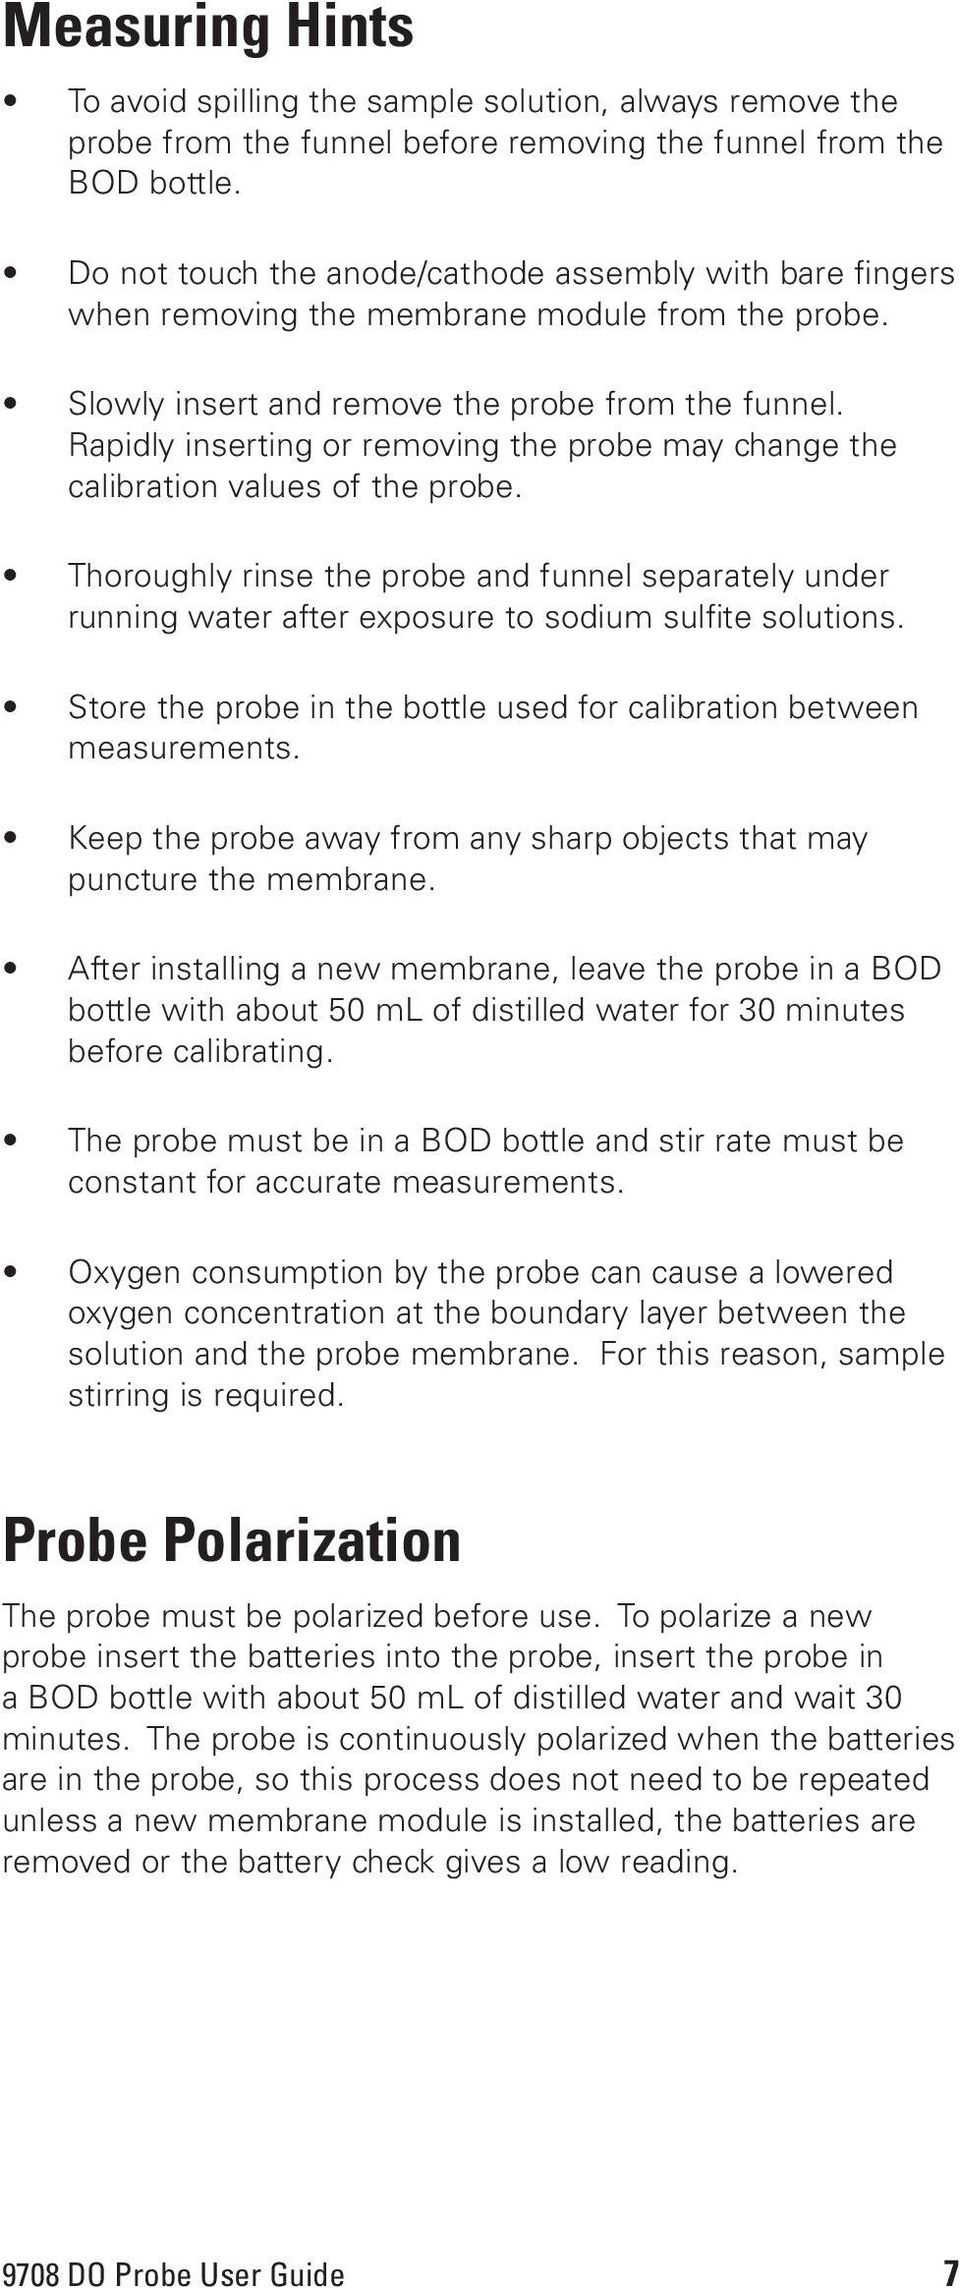 Rapidly inserting or removing the probe may change the calibration values of the probe. Thoroughly rinse the probe and funnel separately under running water after exposure to sodium sulfite solutions.